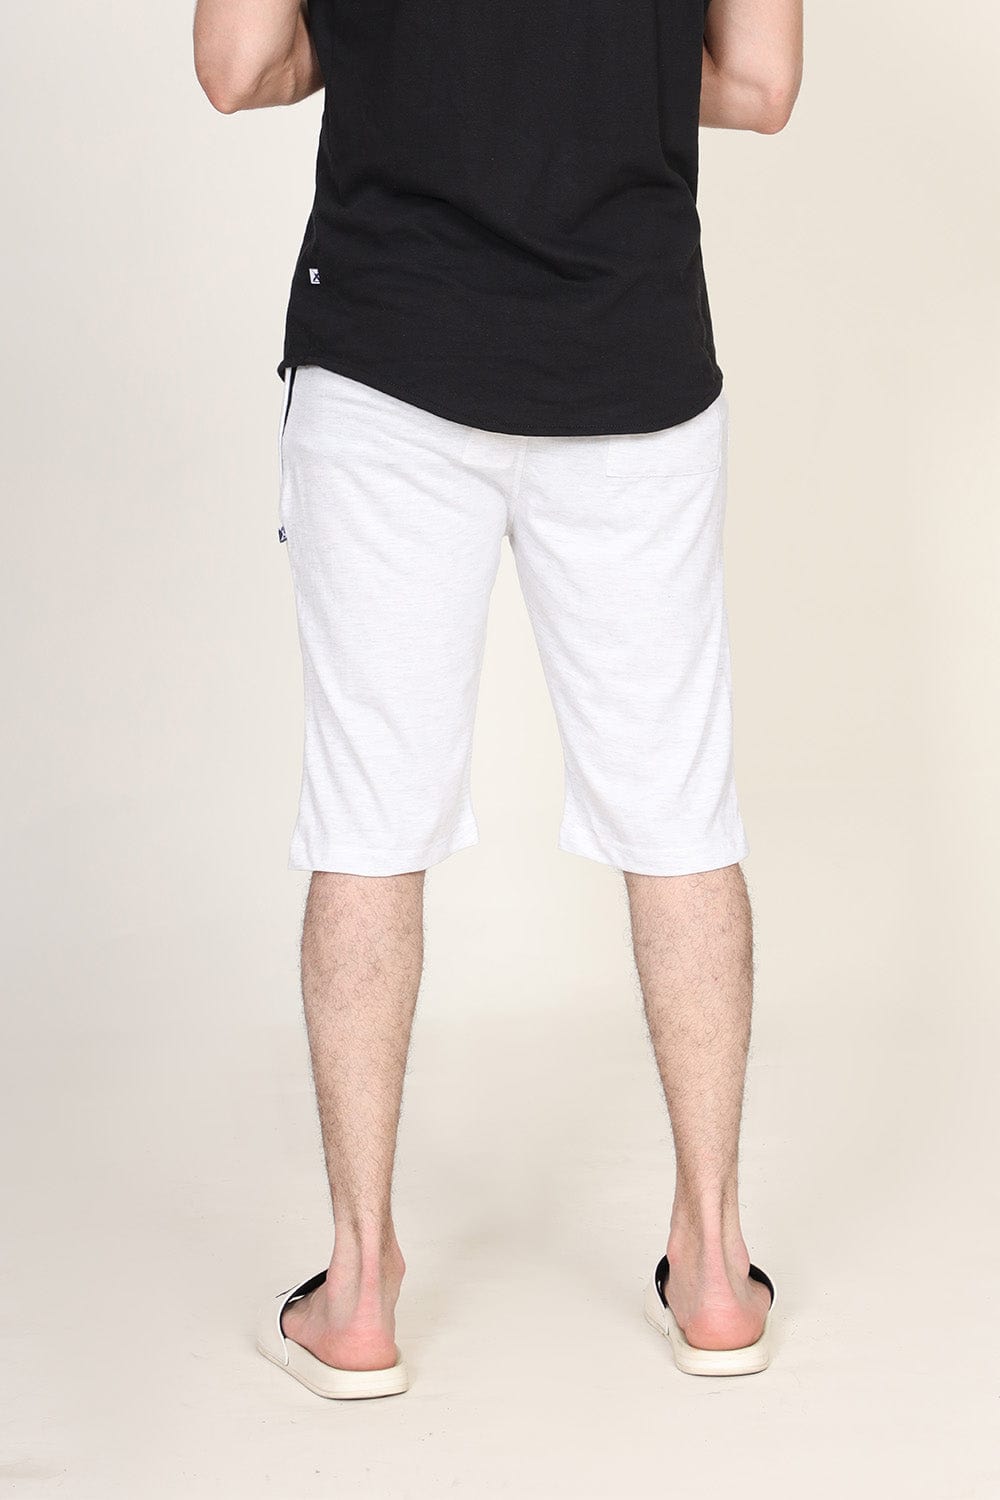 Hope Not Out by Shahid Afridi Men Shorts Man Off White Knit Short